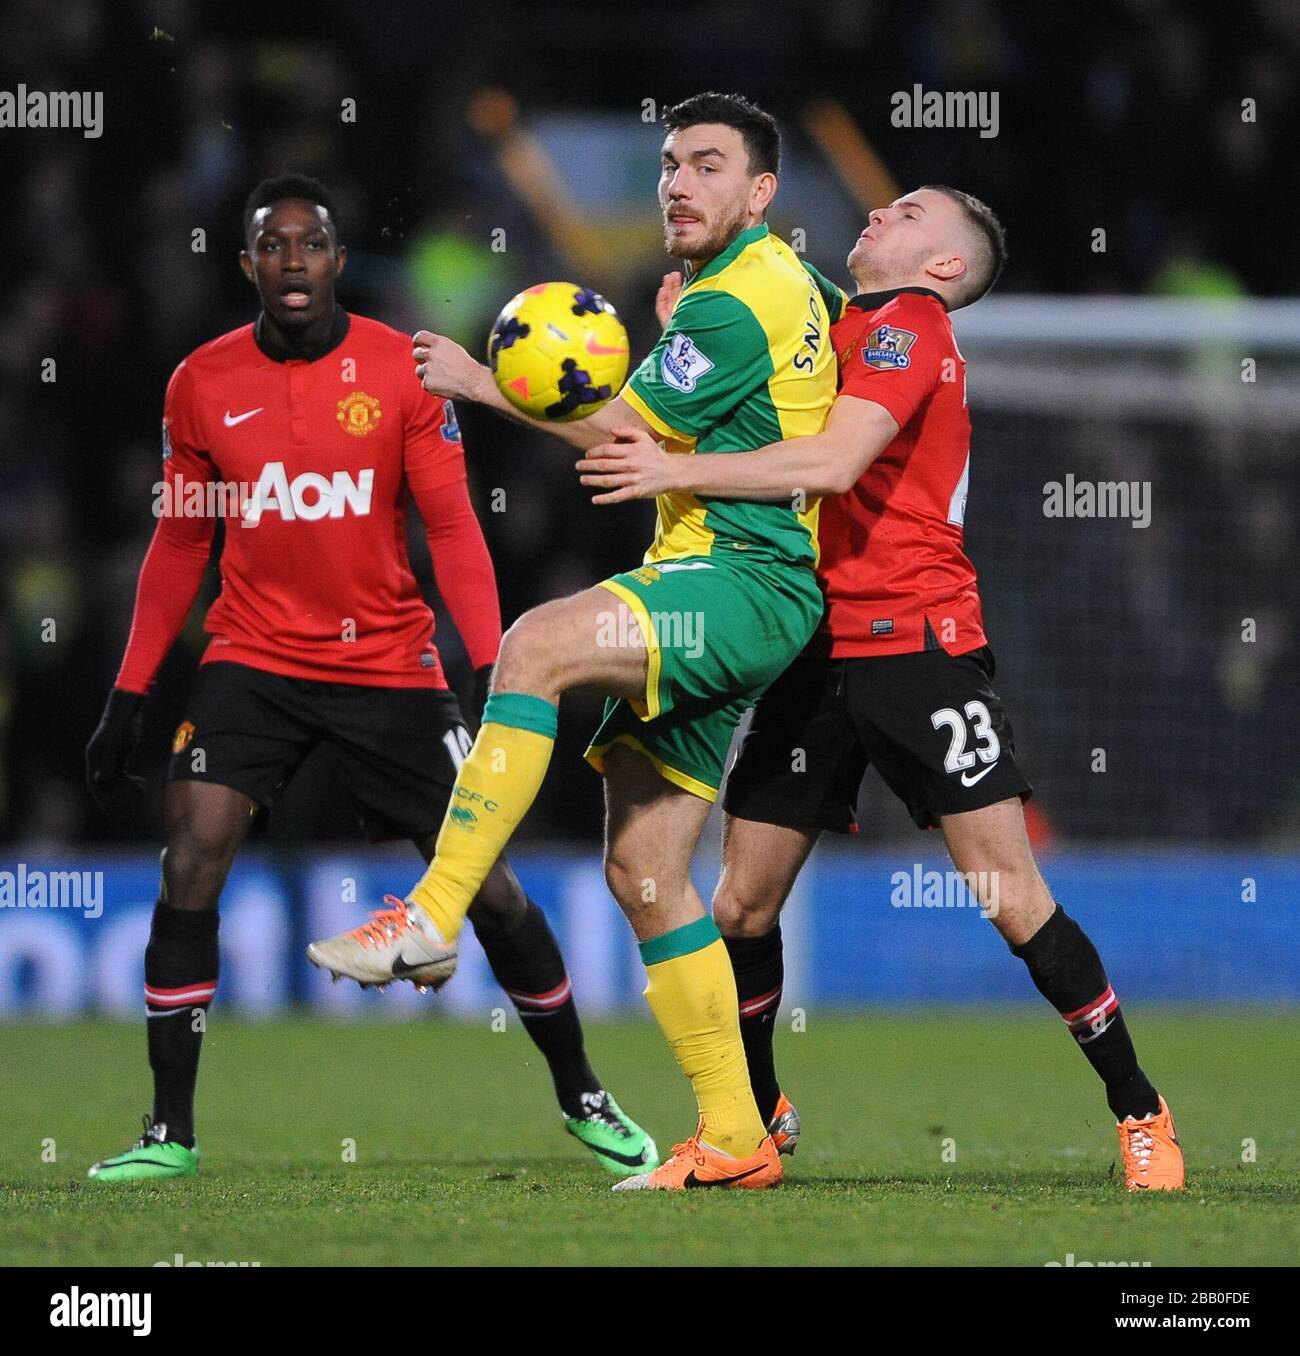 Norwich City's Robert Snodgrass (centre) and Manchester United's Tom Cleverley (right) battle for the ball. Stock Photo